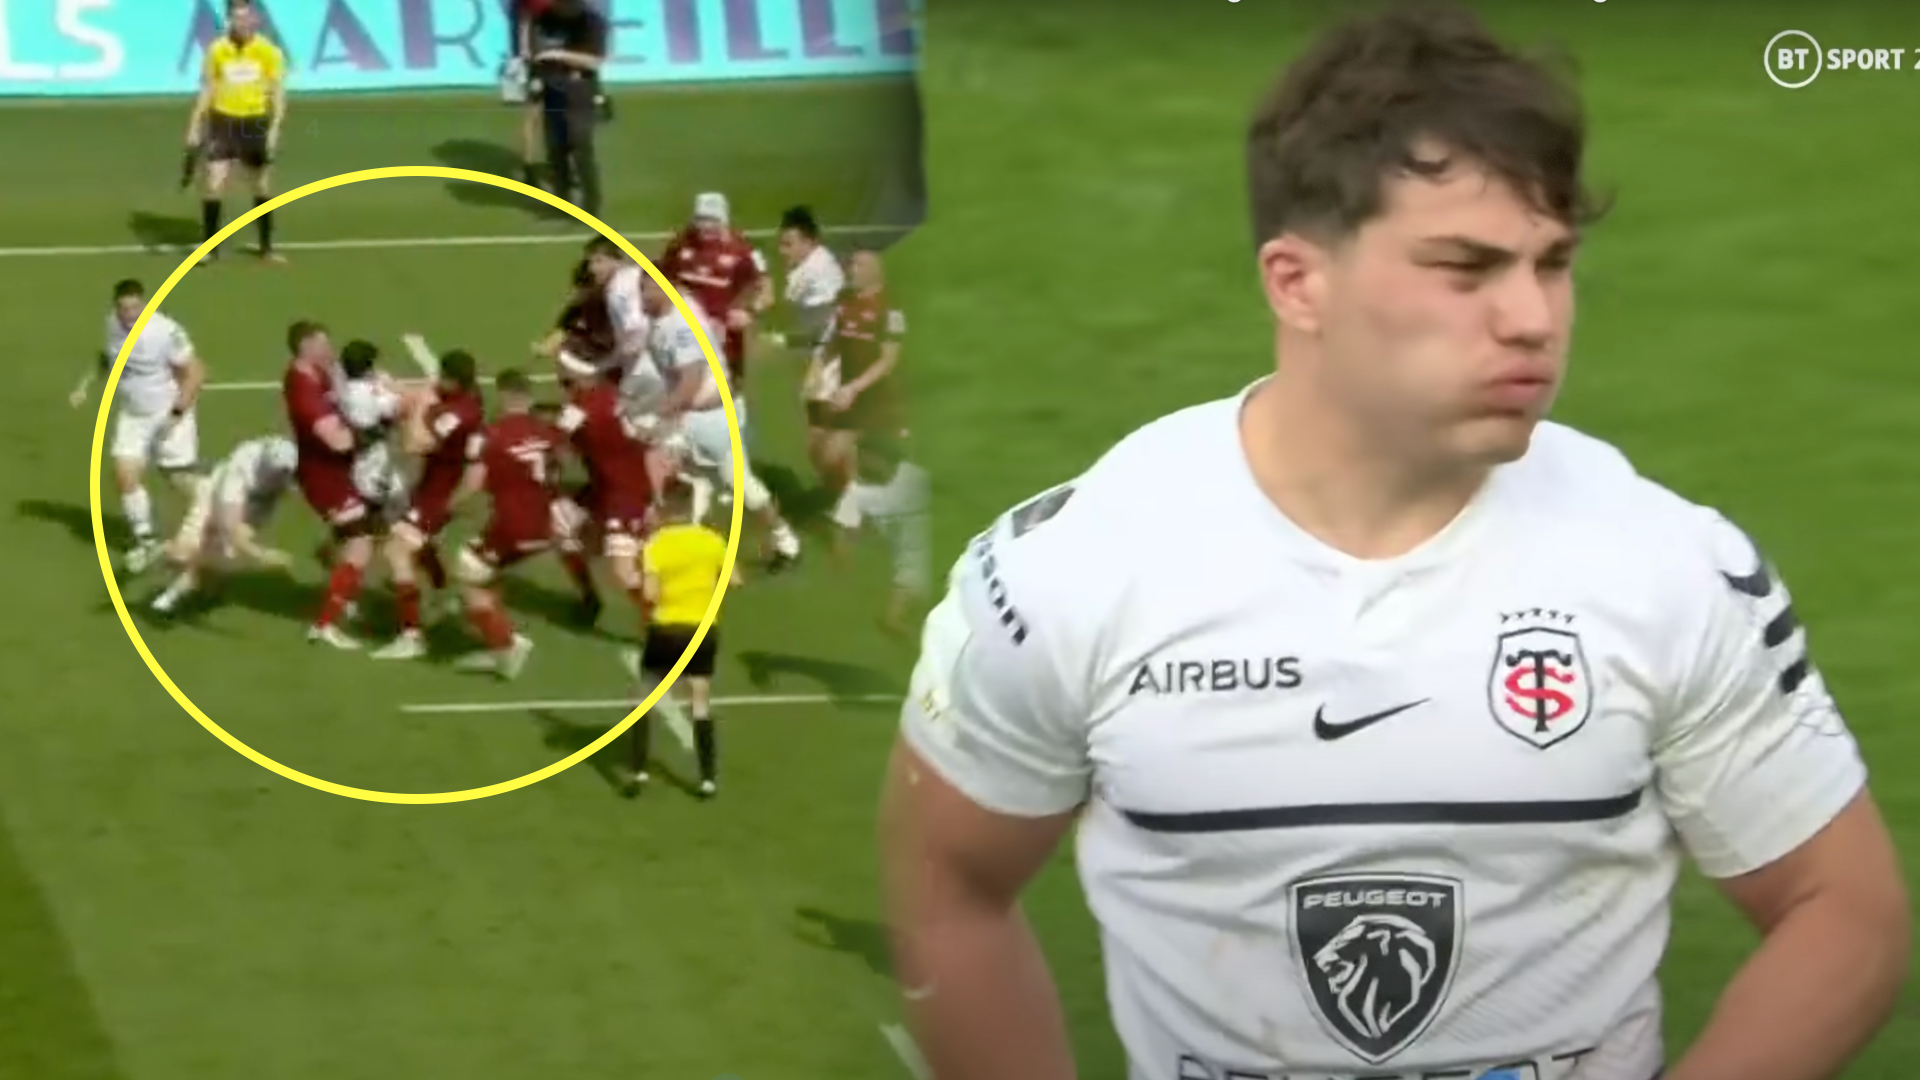 Munster discover the secret to stopping the world's best player